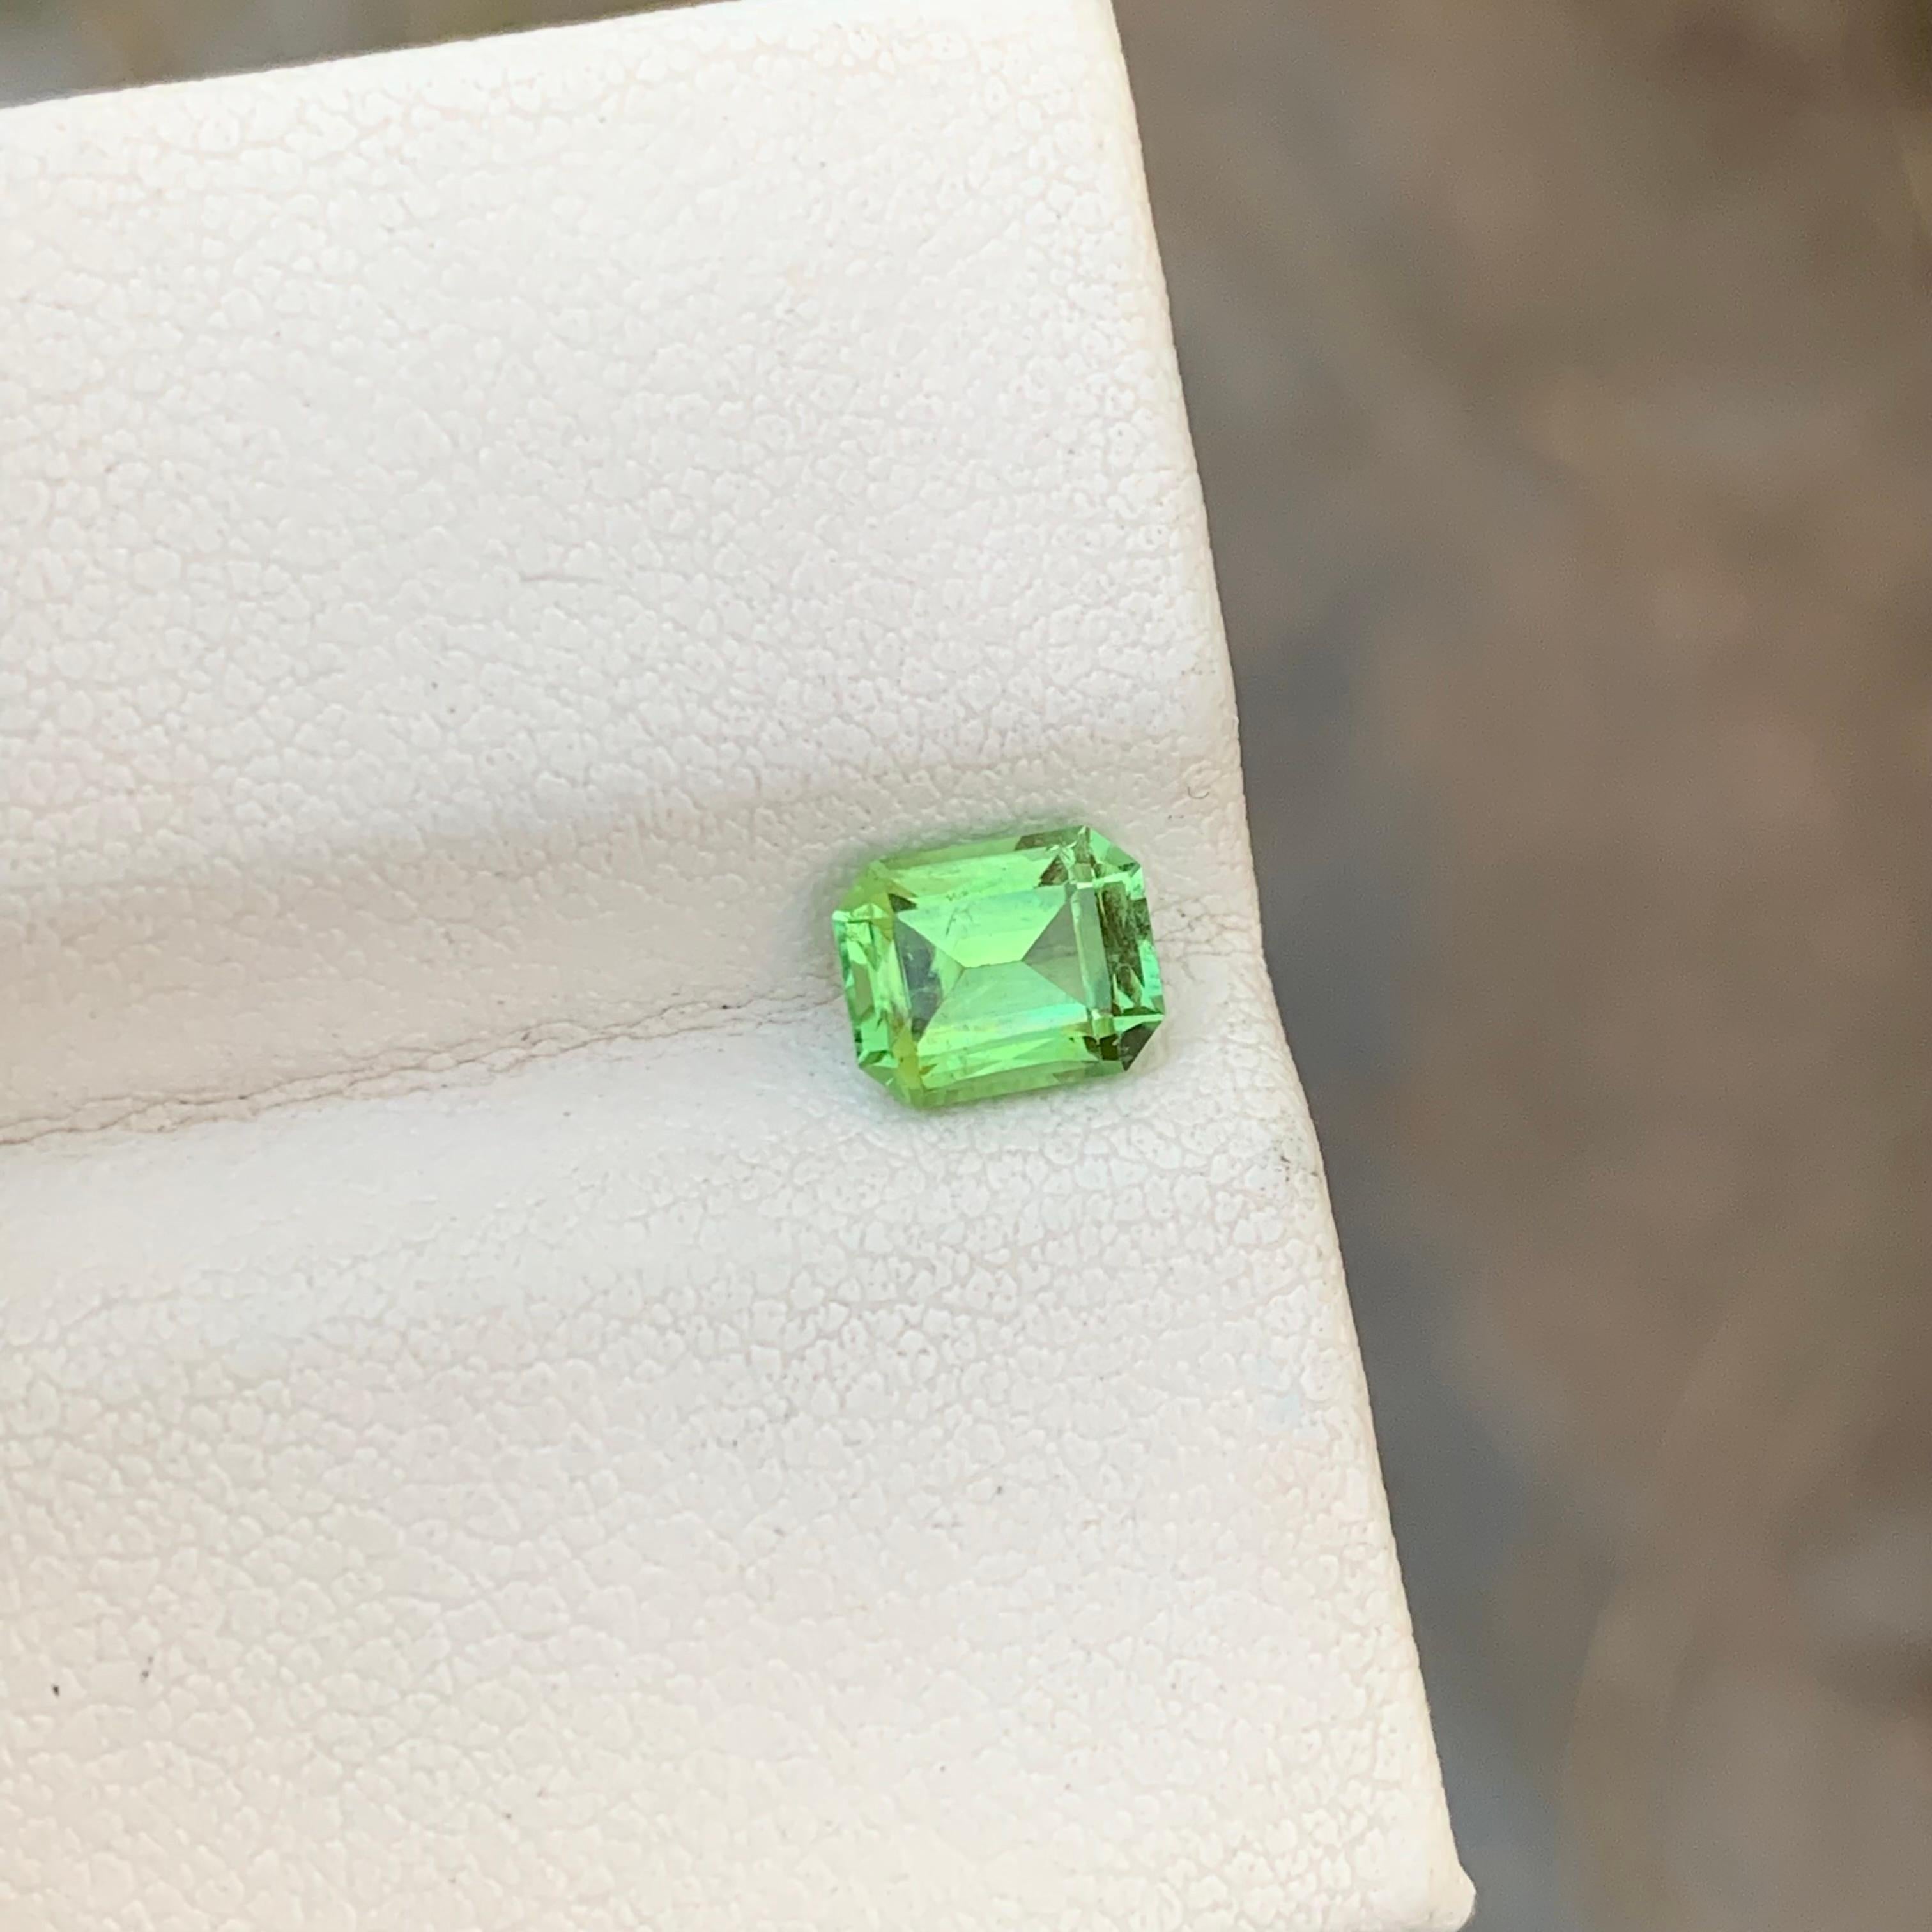 Loose Green Tourmaline
Weight: 1.00 Carats
Dimension: 6.5 x 5.2 x 3.9 Mm
Colour: Green 
Origin: Afghanistan
Certificate: On Demand
Treatment: Non

Tourmaline is a captivating gemstone known for its remarkable variety of colors, making it a favorite